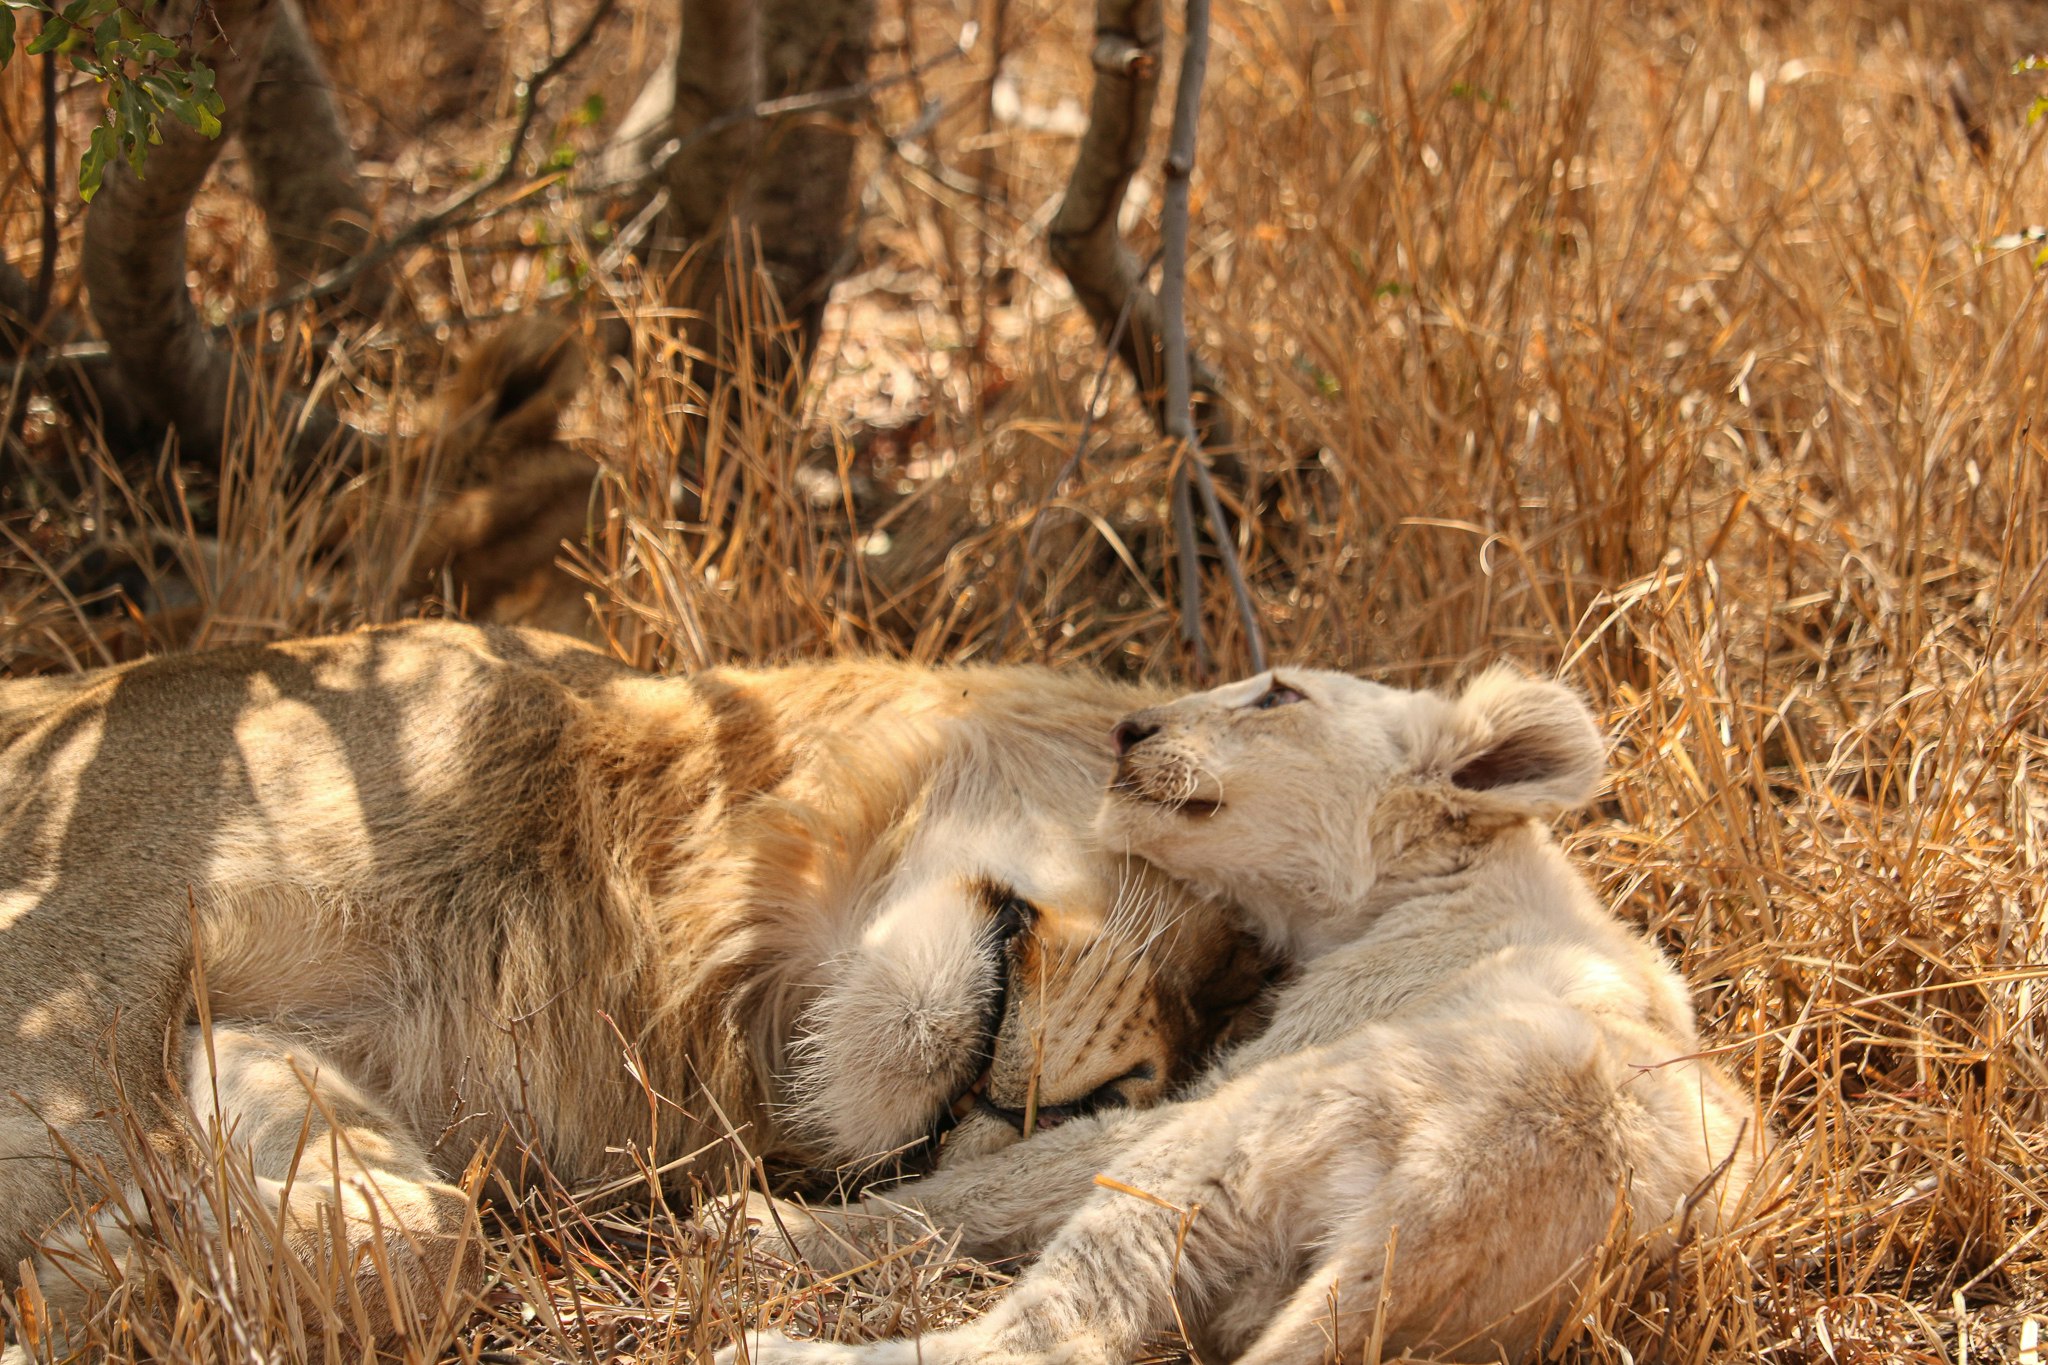 A young cub lies in long, dried grass, with its head resting on the head of a large sleeping male lion.